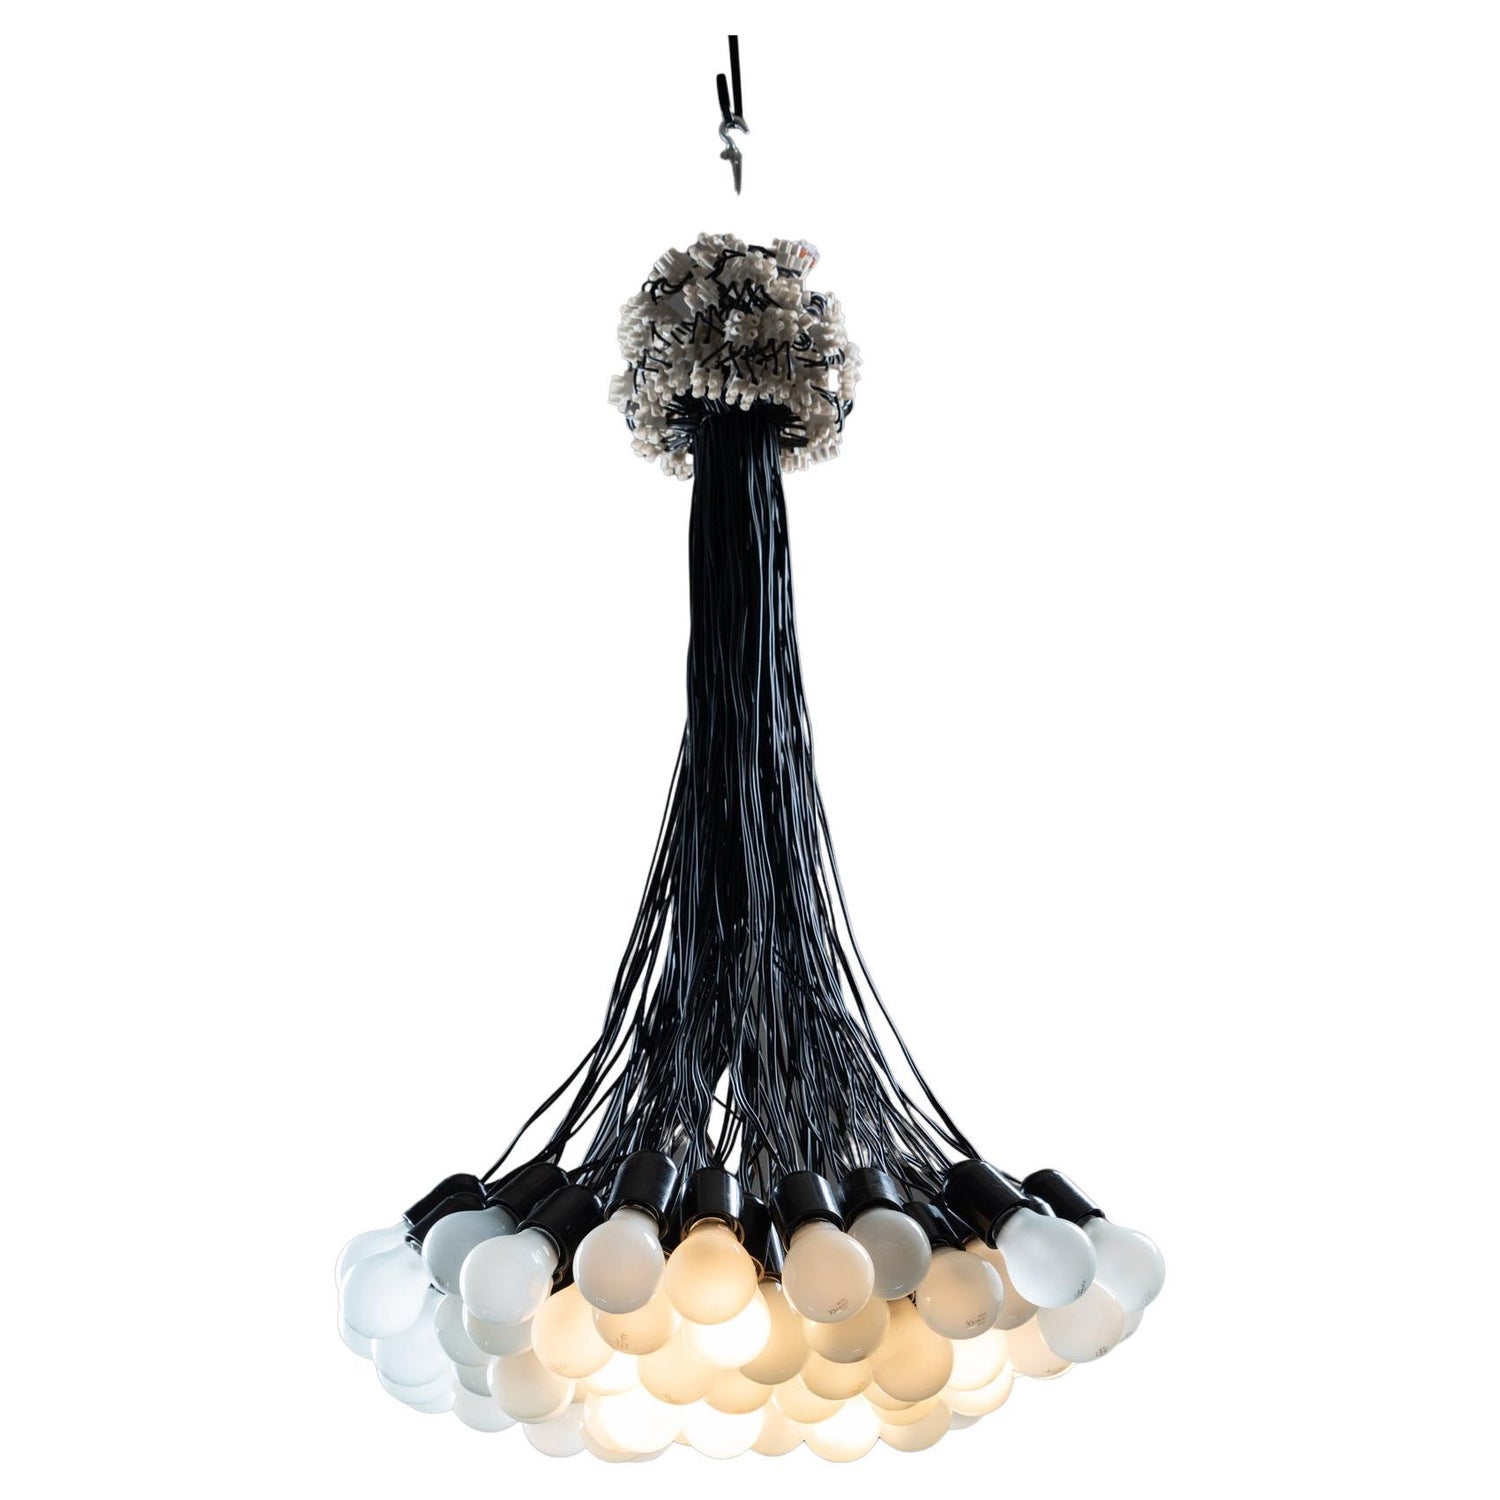 Droog Design Chandelier 85 Lamps by Rody Graumans, 1995 For Sale at 1stDibs  | 85 lamps chandelier